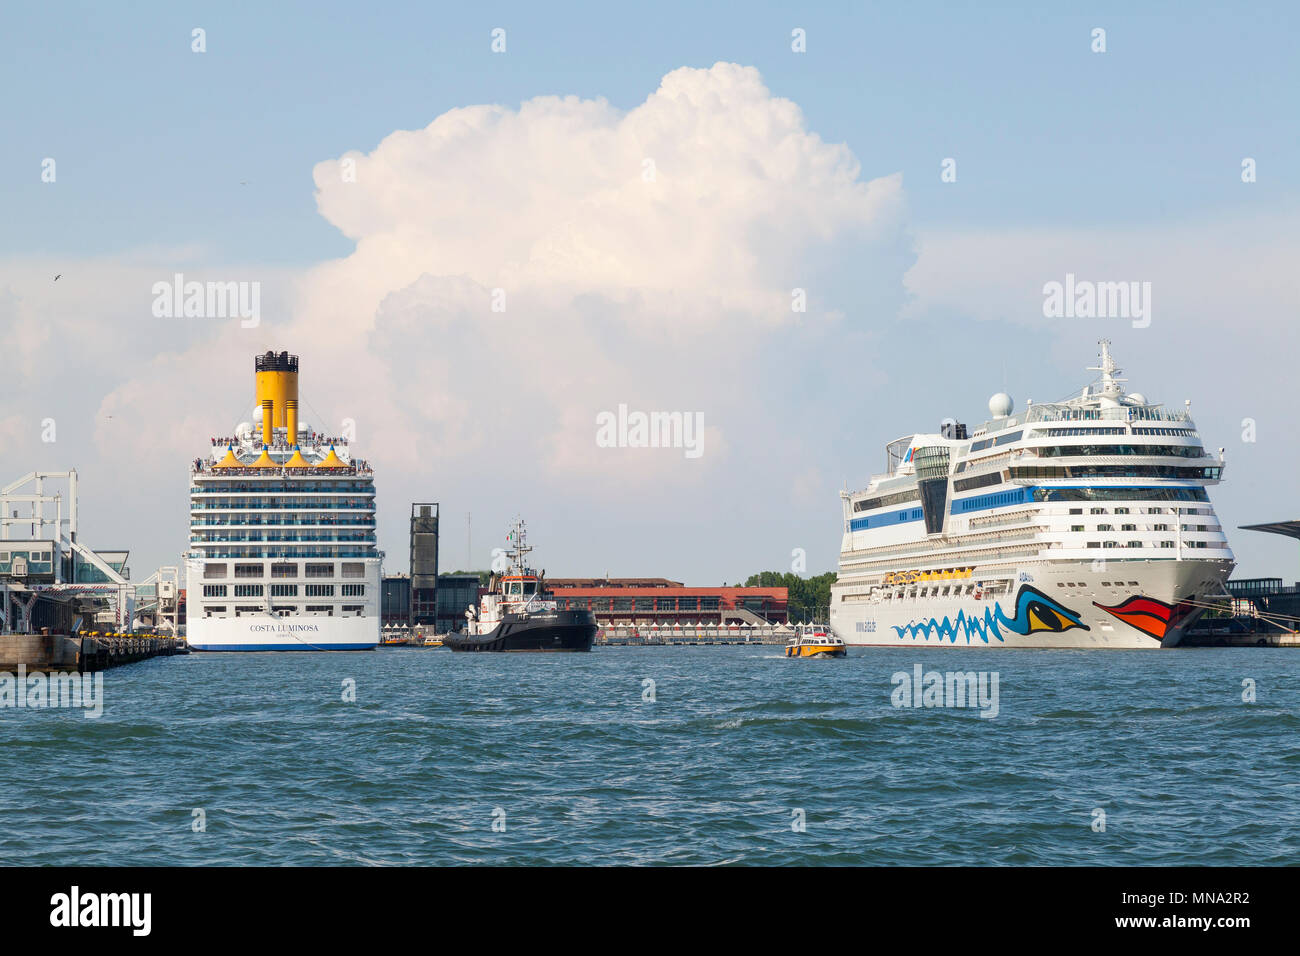 The Costa Luminosa and Aidablu cruise liners in port, Venice, Veneto, Italy with a tug standing by to assist in a departure on a voyage. Passengers on Stock Photo